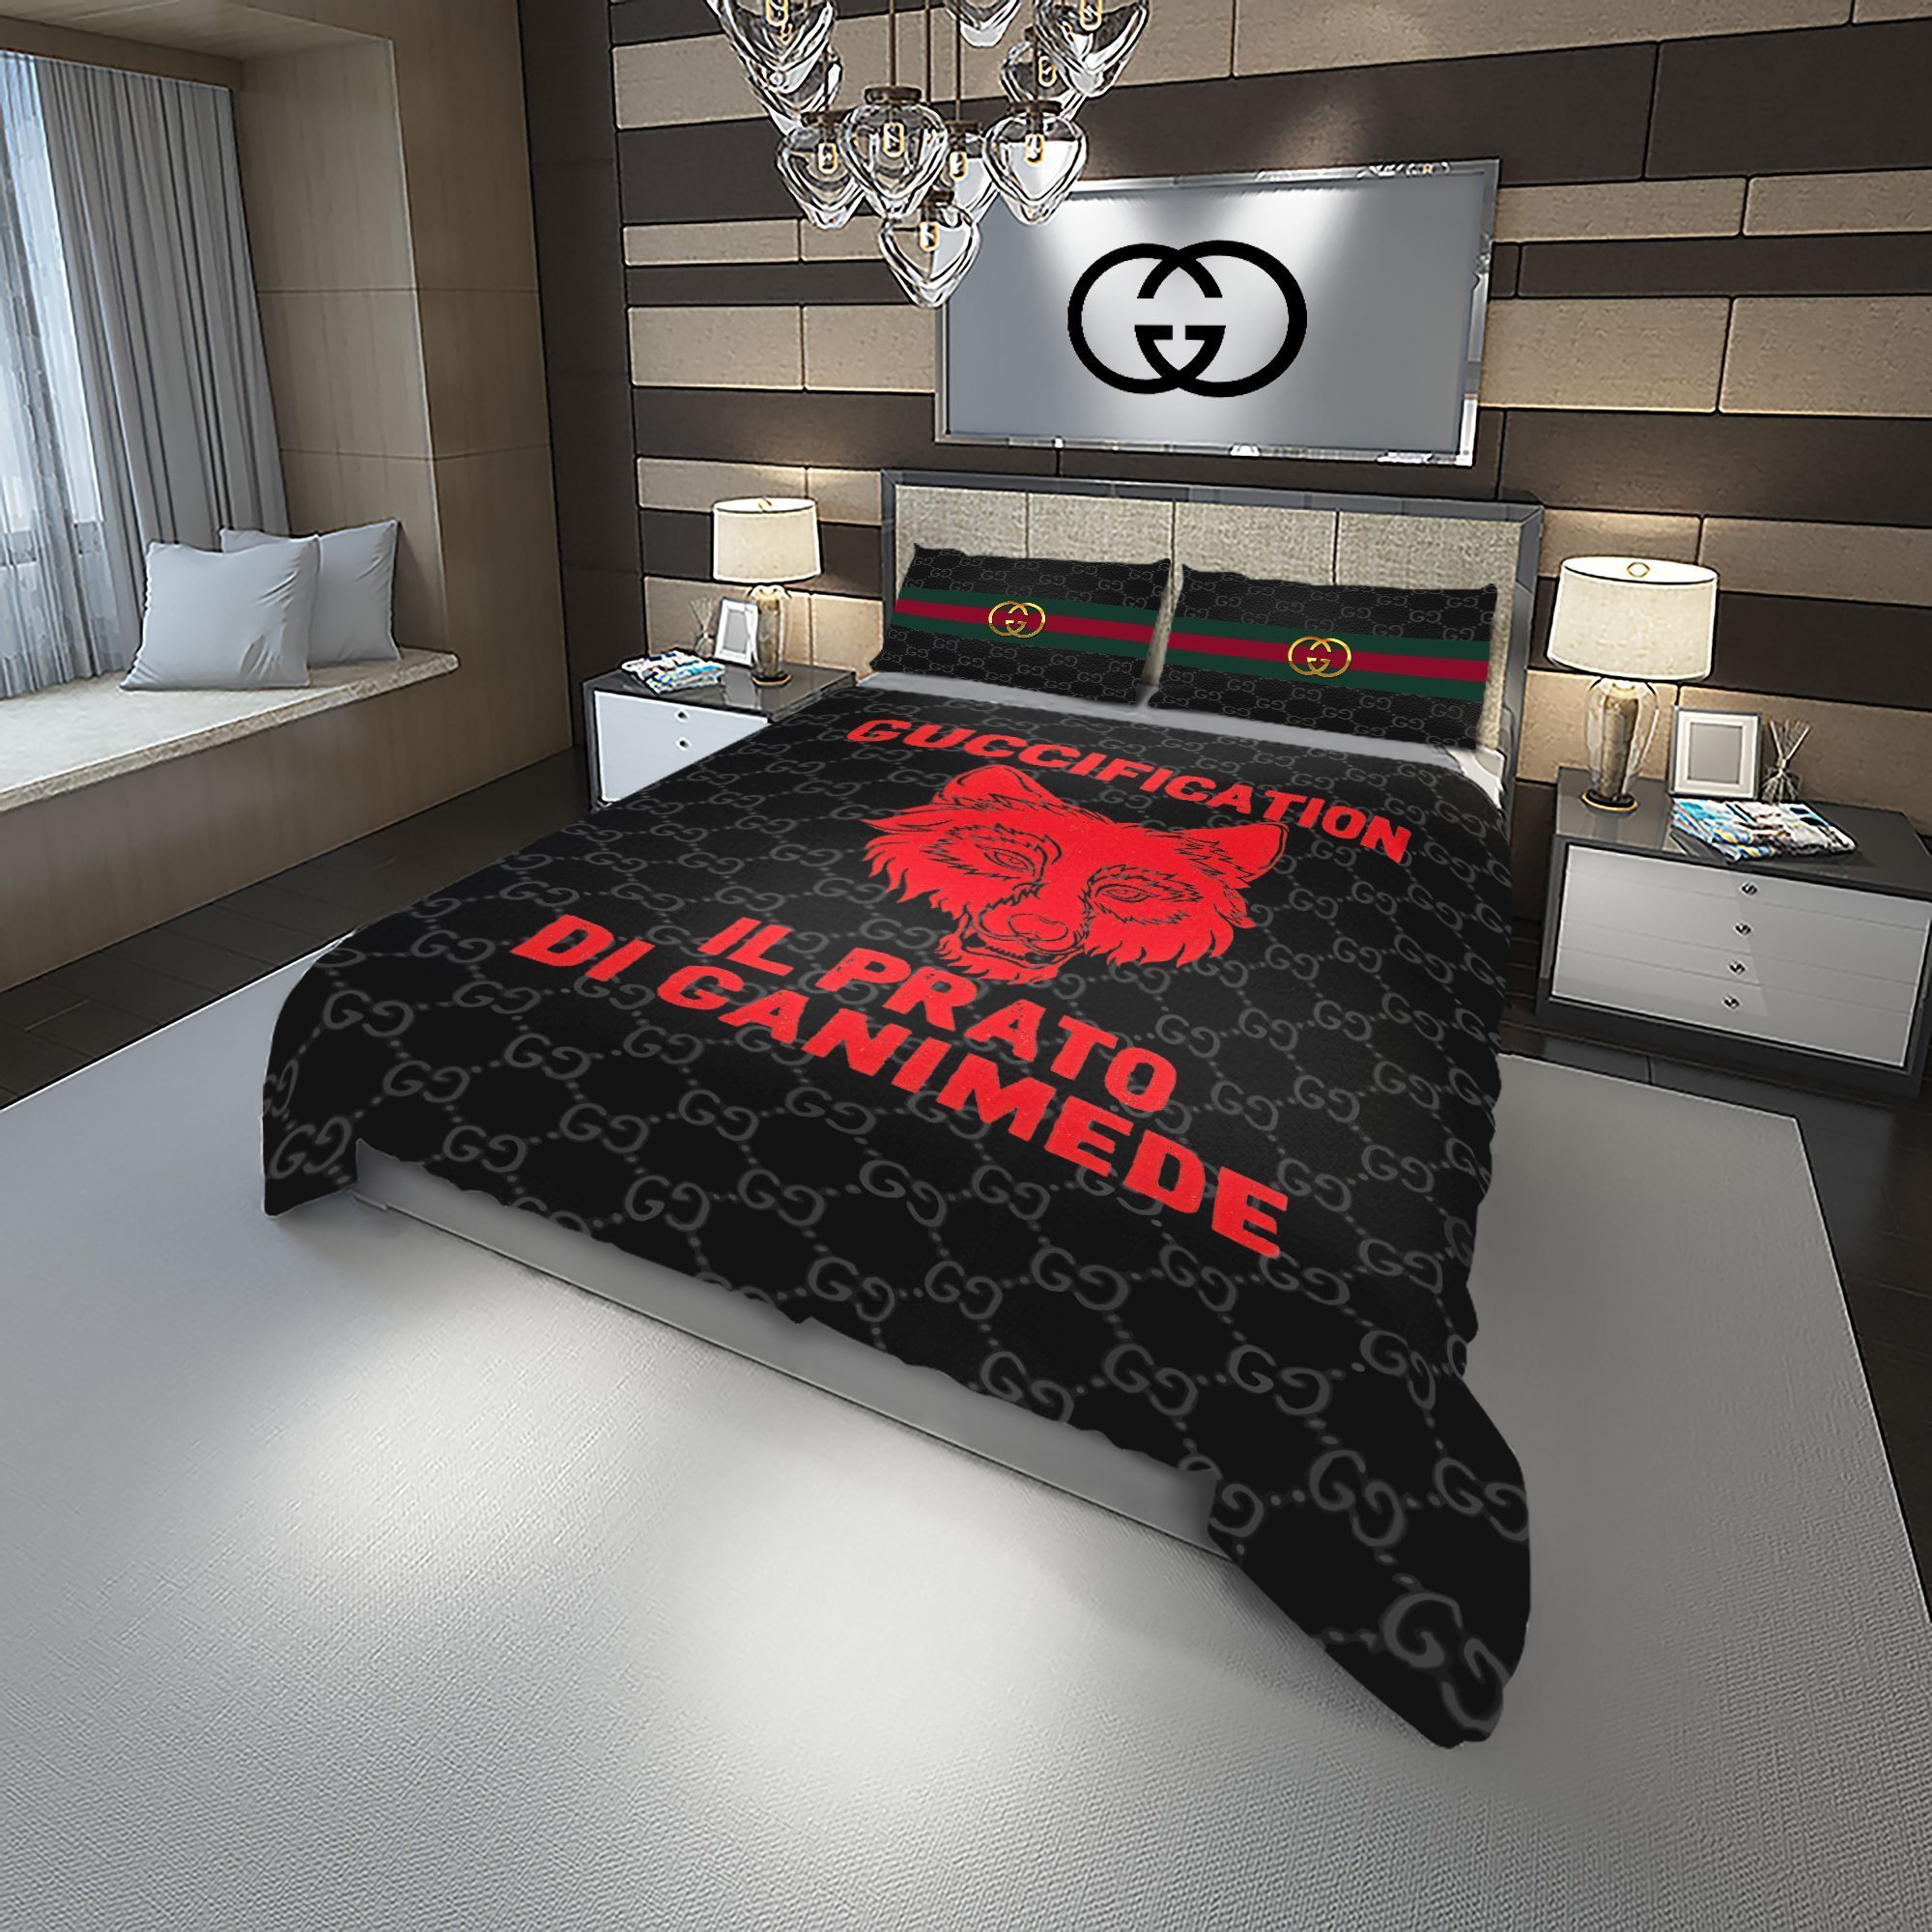 Let me show you about some luxury brand bedding set 2022 63